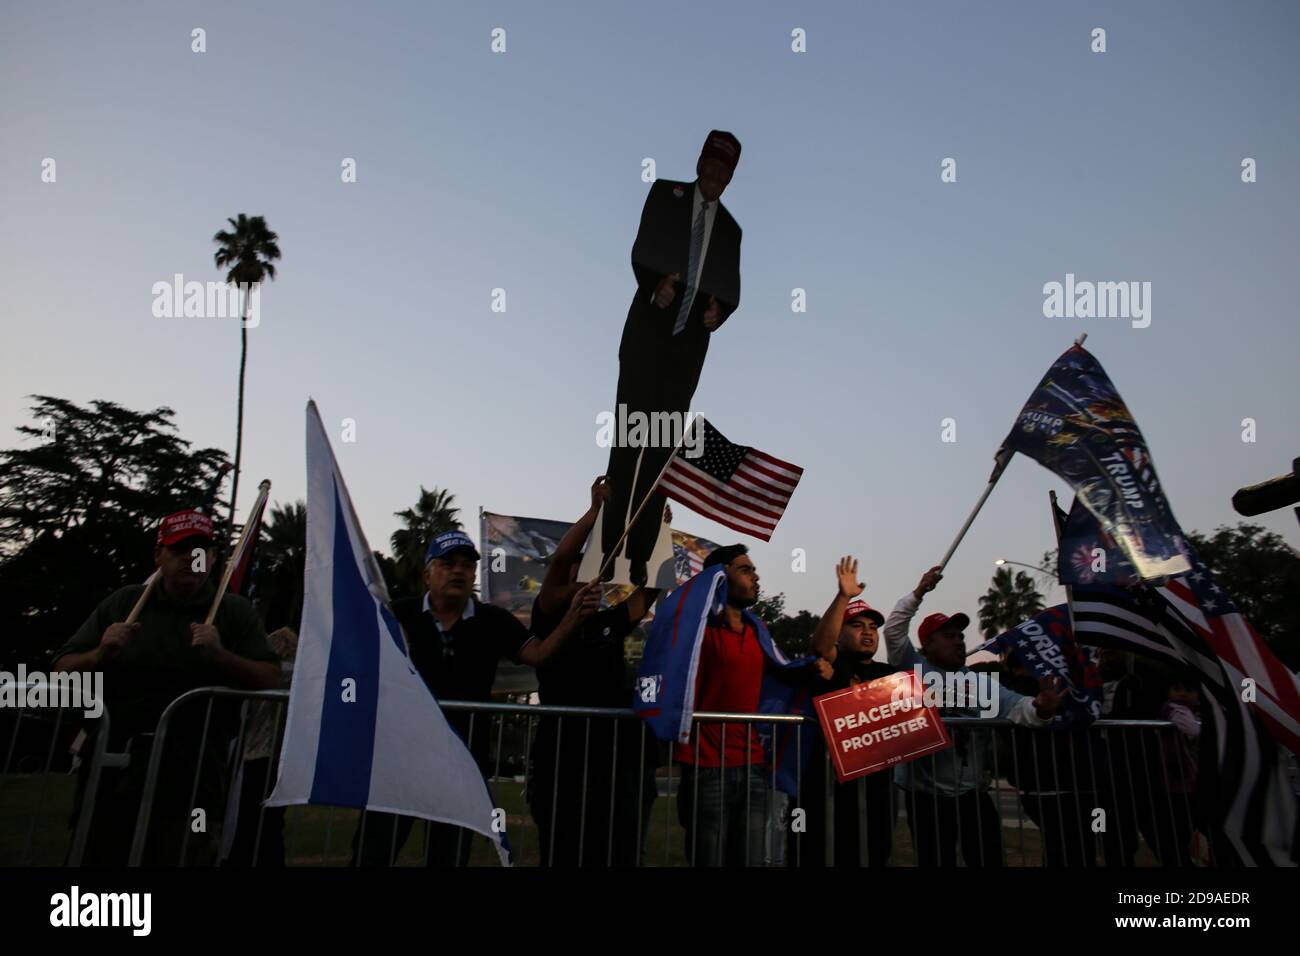 Supporters of President Trump hold placards and posters in support of President Trump during the Trump rally at Beverly Hills Garden Park.On the night of the United States Presidential Election on Tuesday, November 3, 2020, supporters of President Donald Trump met at Beverly Gardens Park in Beverly Hills, California to call for the reelection of Donald Trump. Stock Photo